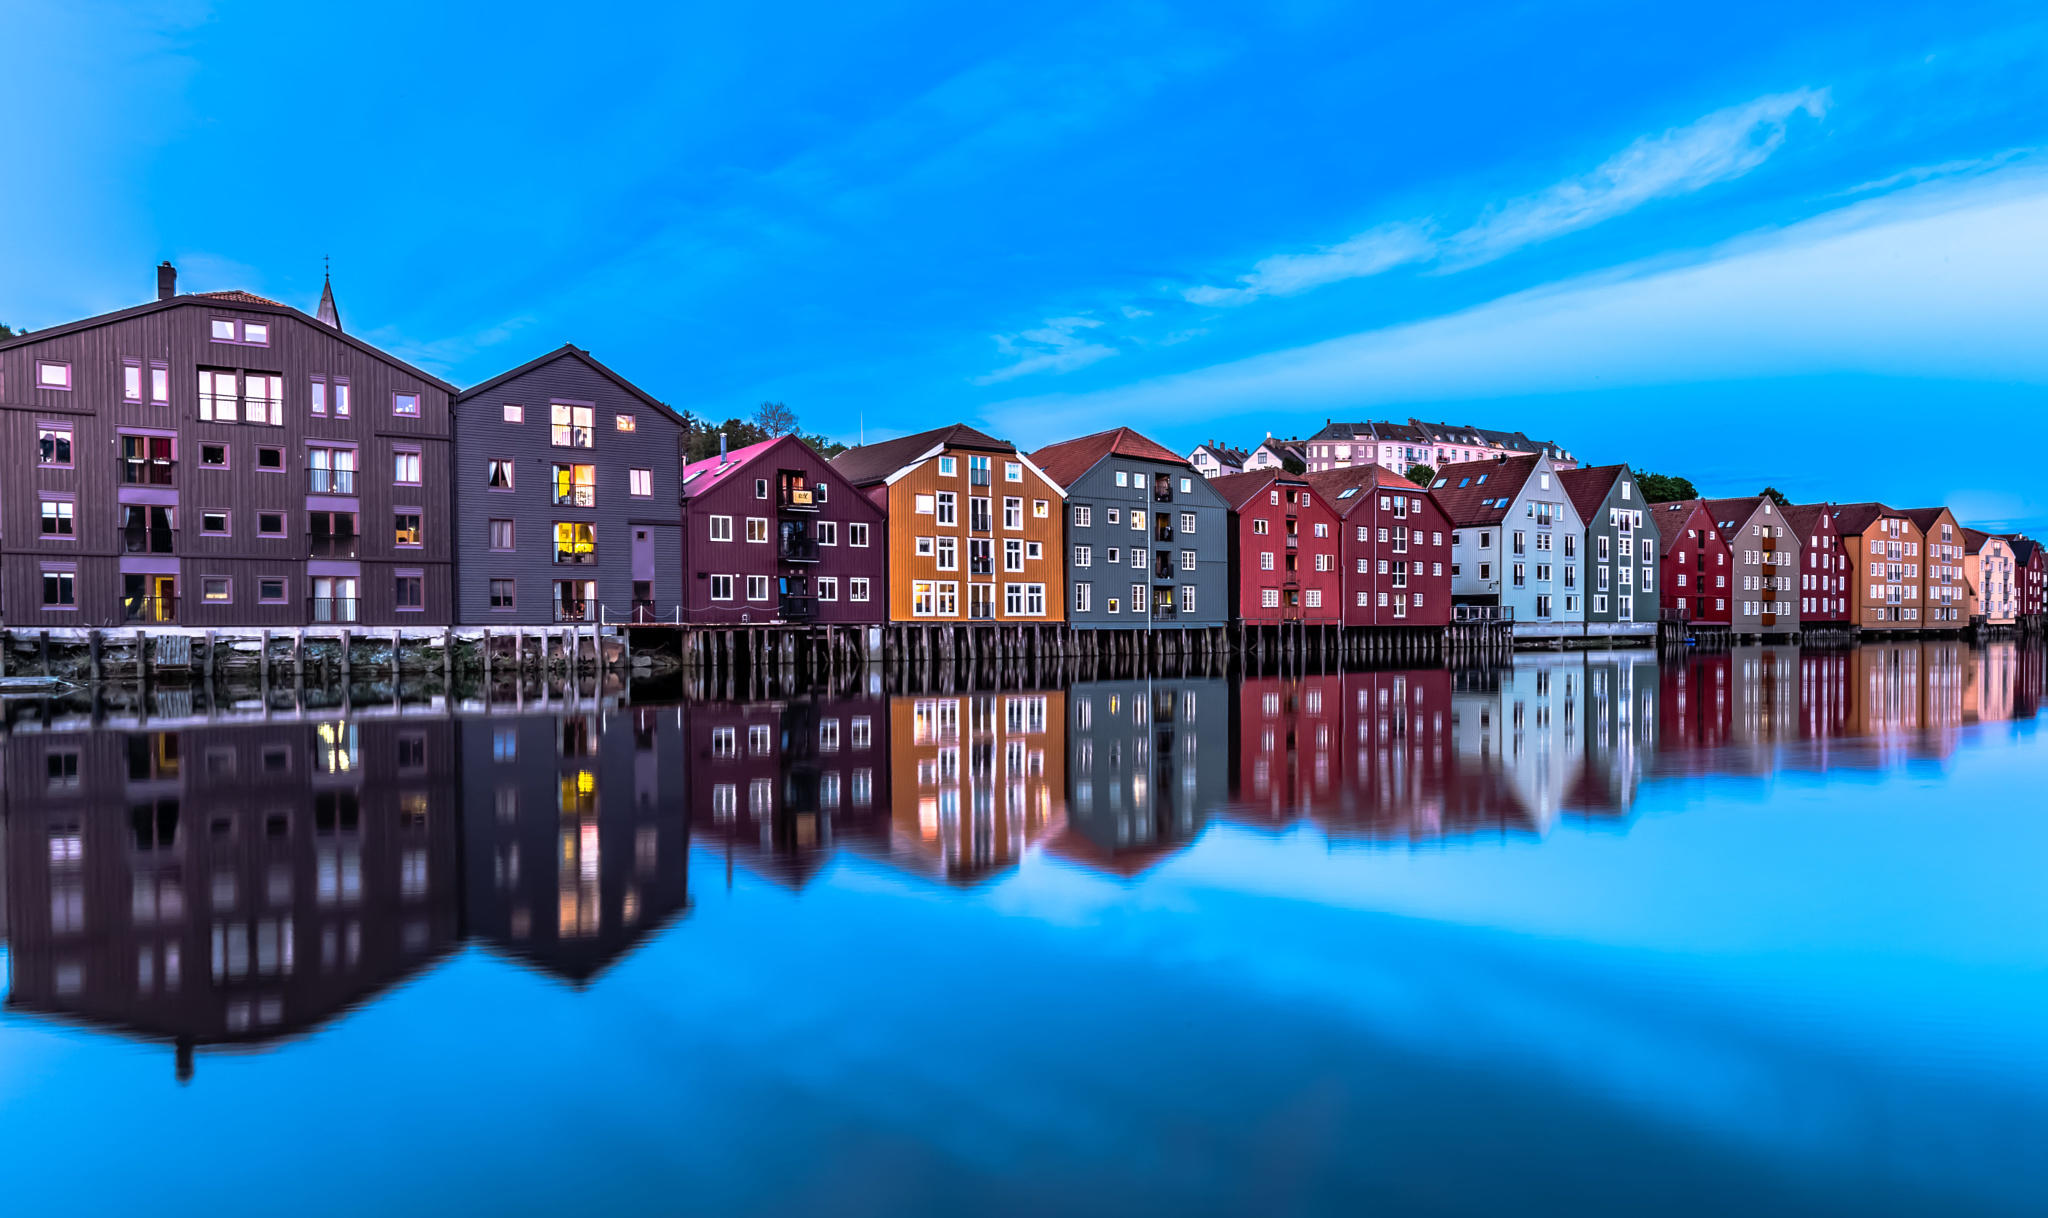 Blue hour at Trondheim, Norway